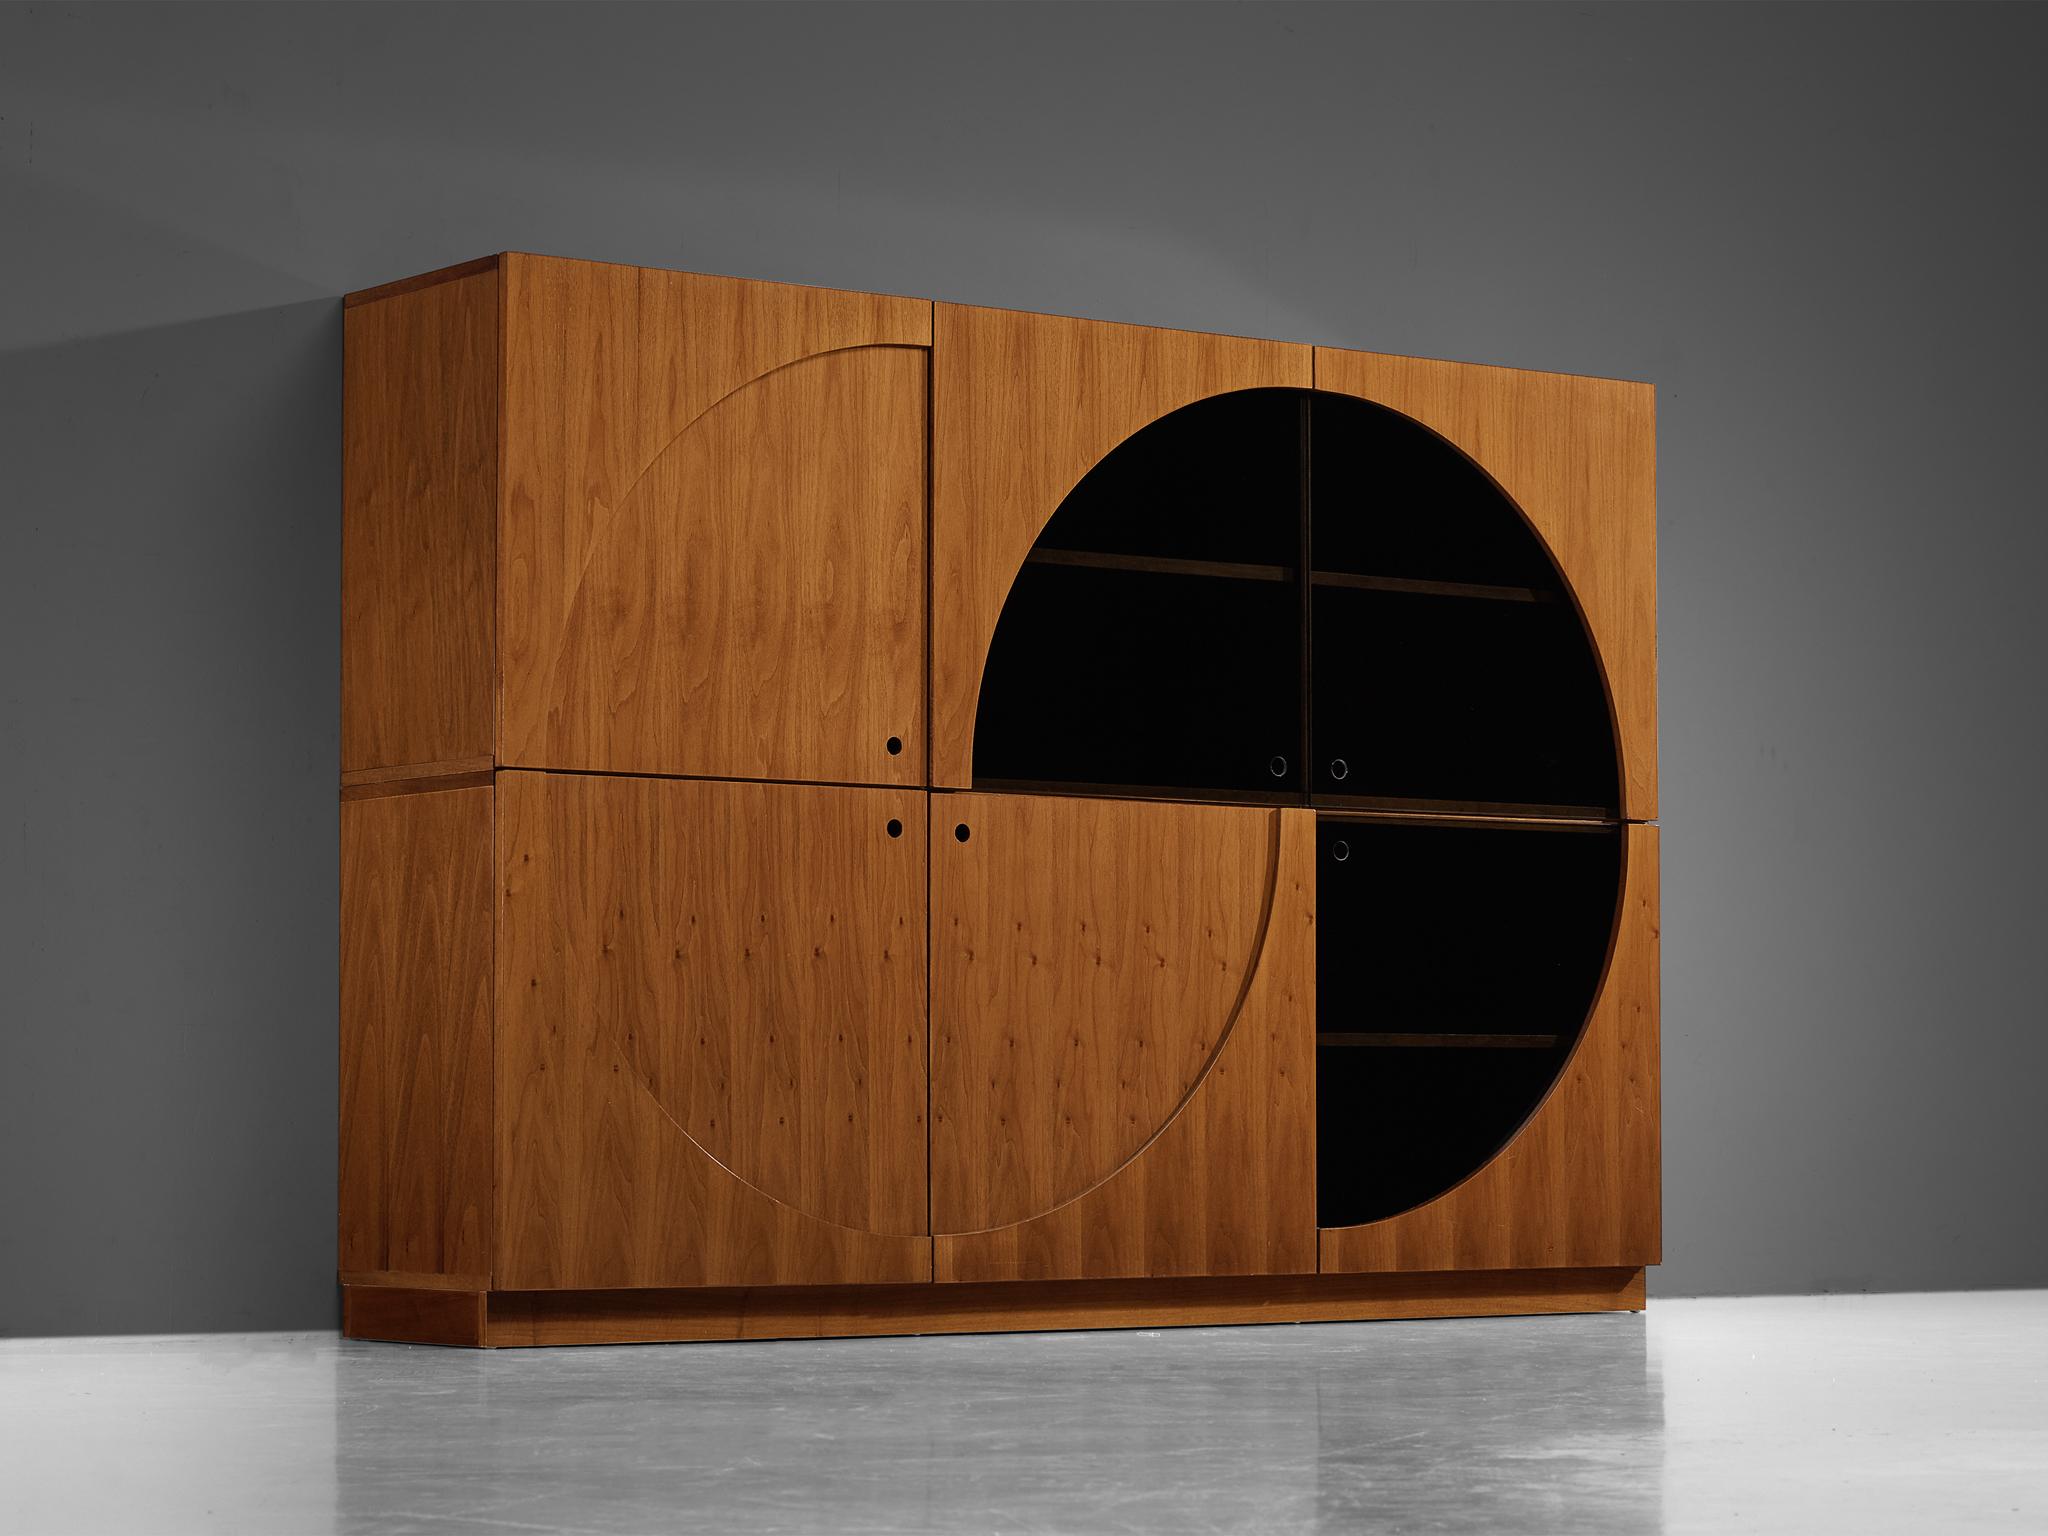 Nikol International storage unit/sideboard, walnut, smoked glass, Italy, 1970s/begin 1980s

Presenting an exquisite sideboard that skillfully balances form and function with its graceful use of round lines, this piece is a visual delight. Crafted